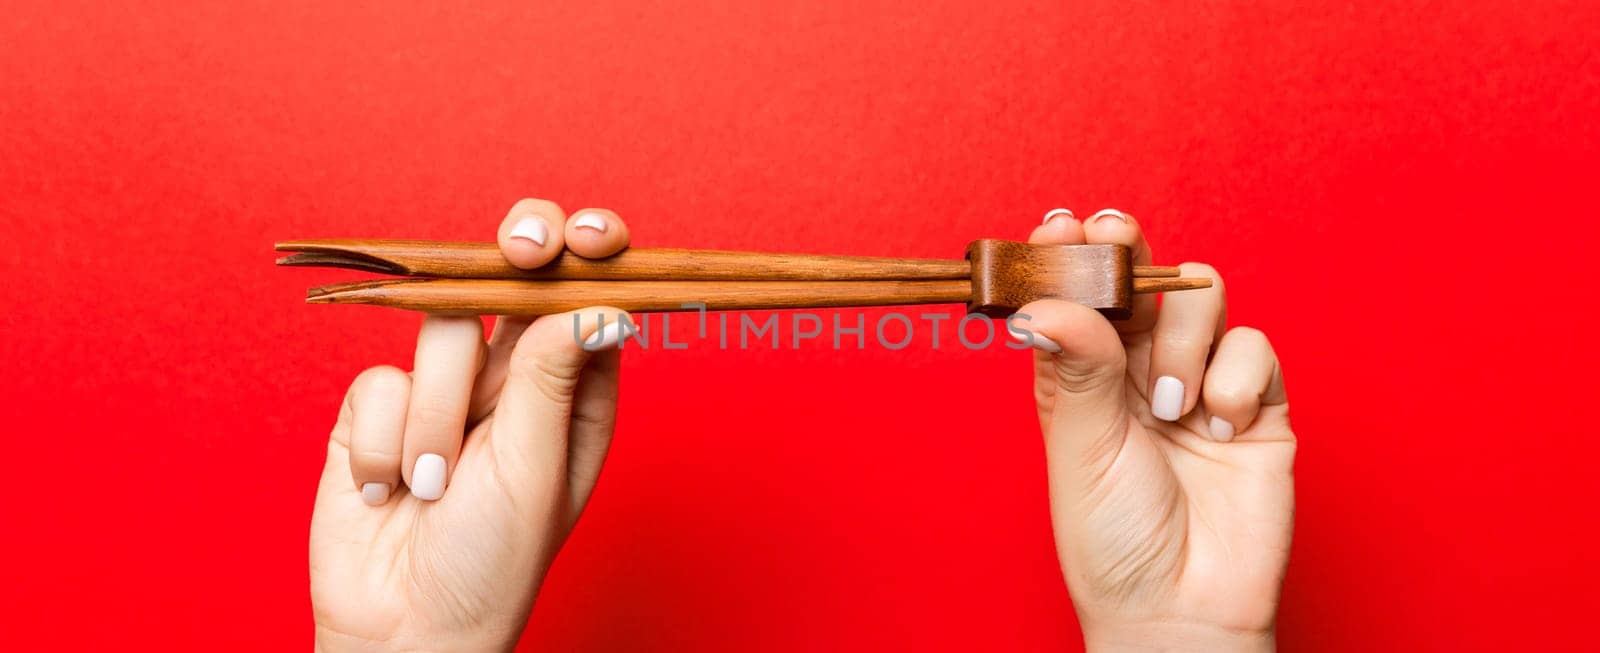 Crop image of two female hands holding chopsticks on red background. Ready to eat concept with copy space.